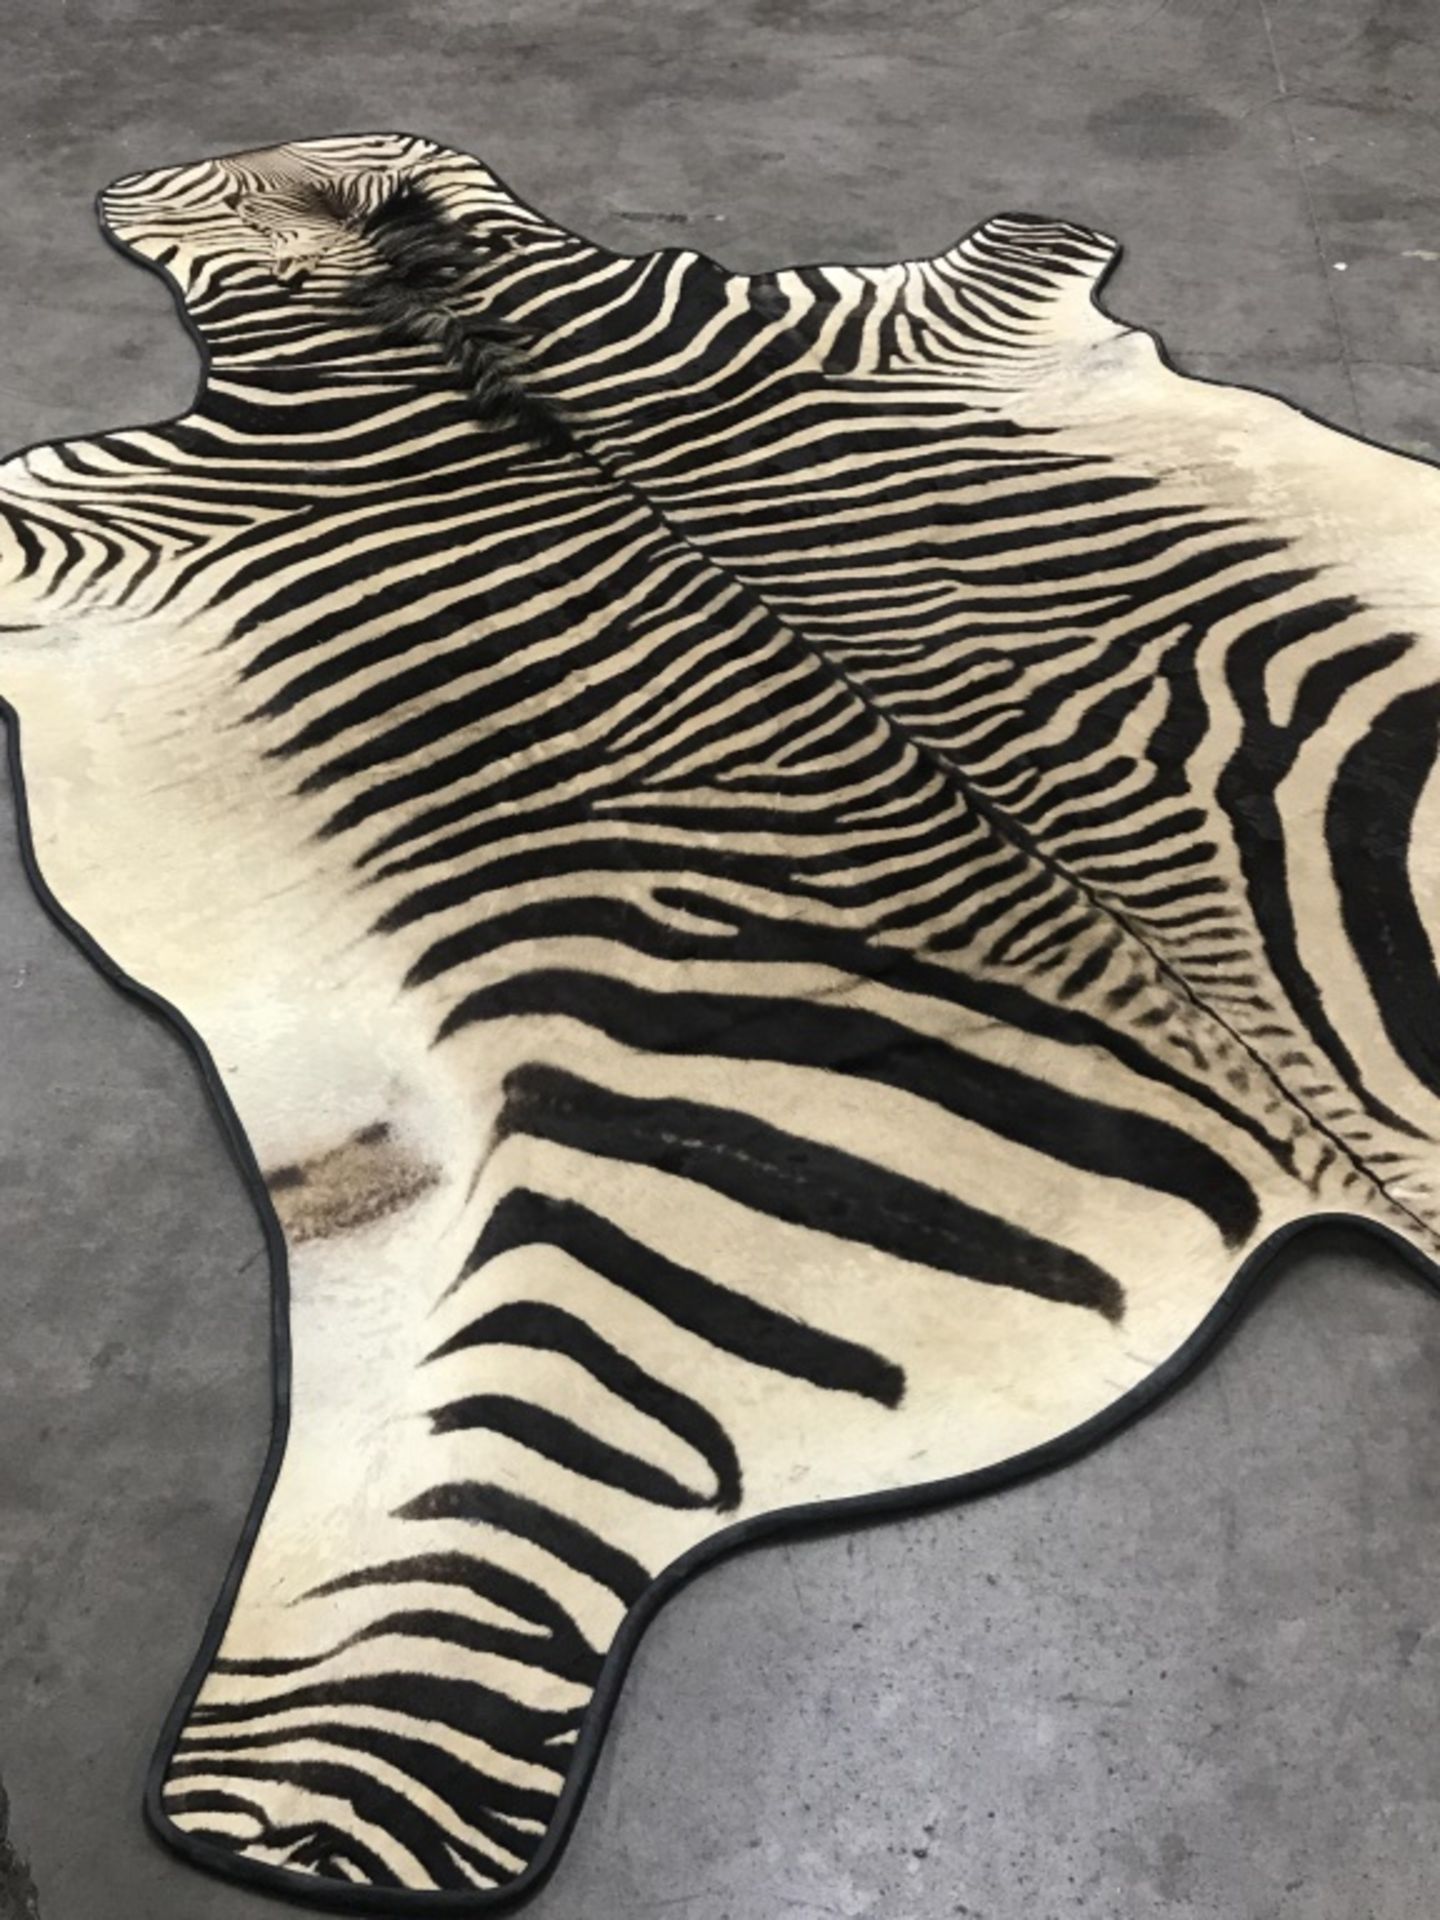 Very Nice Zebra Rug (TX Res. Only) - Image 11 of 13